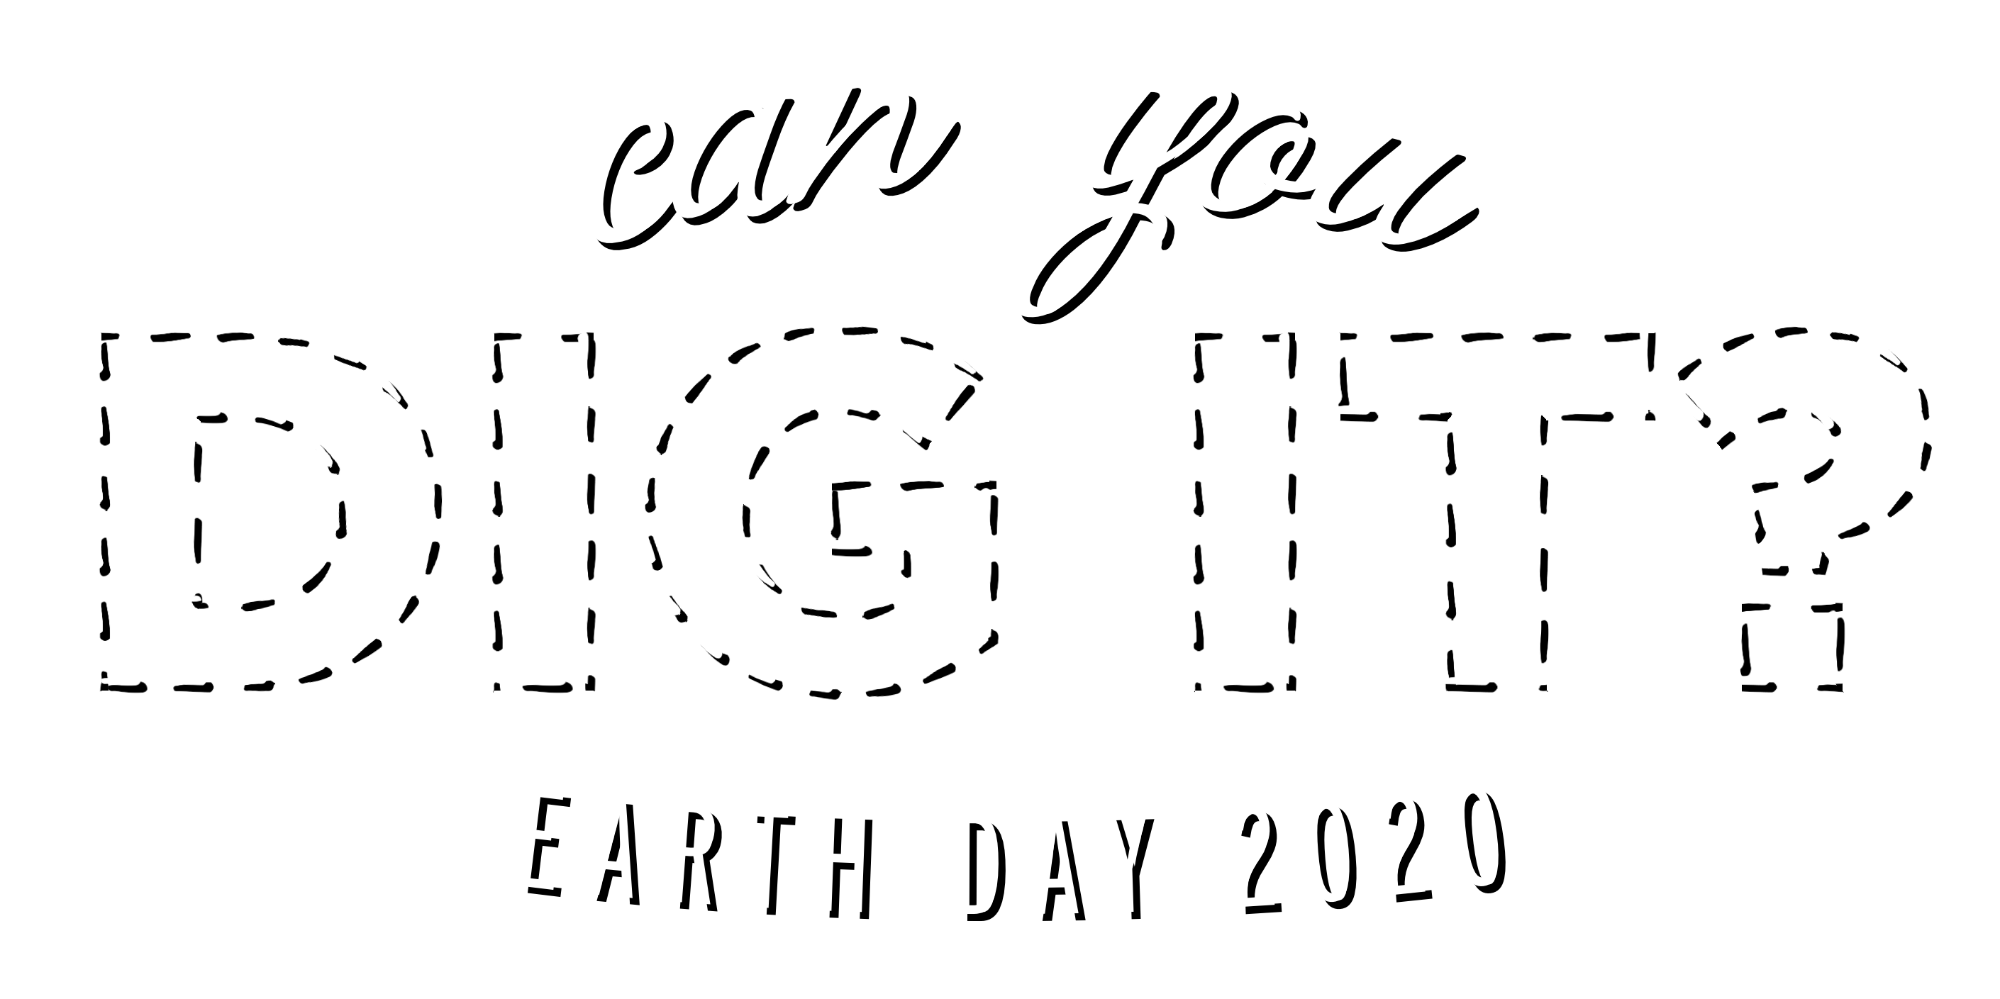 Can You Dig It? Earth Day 2020